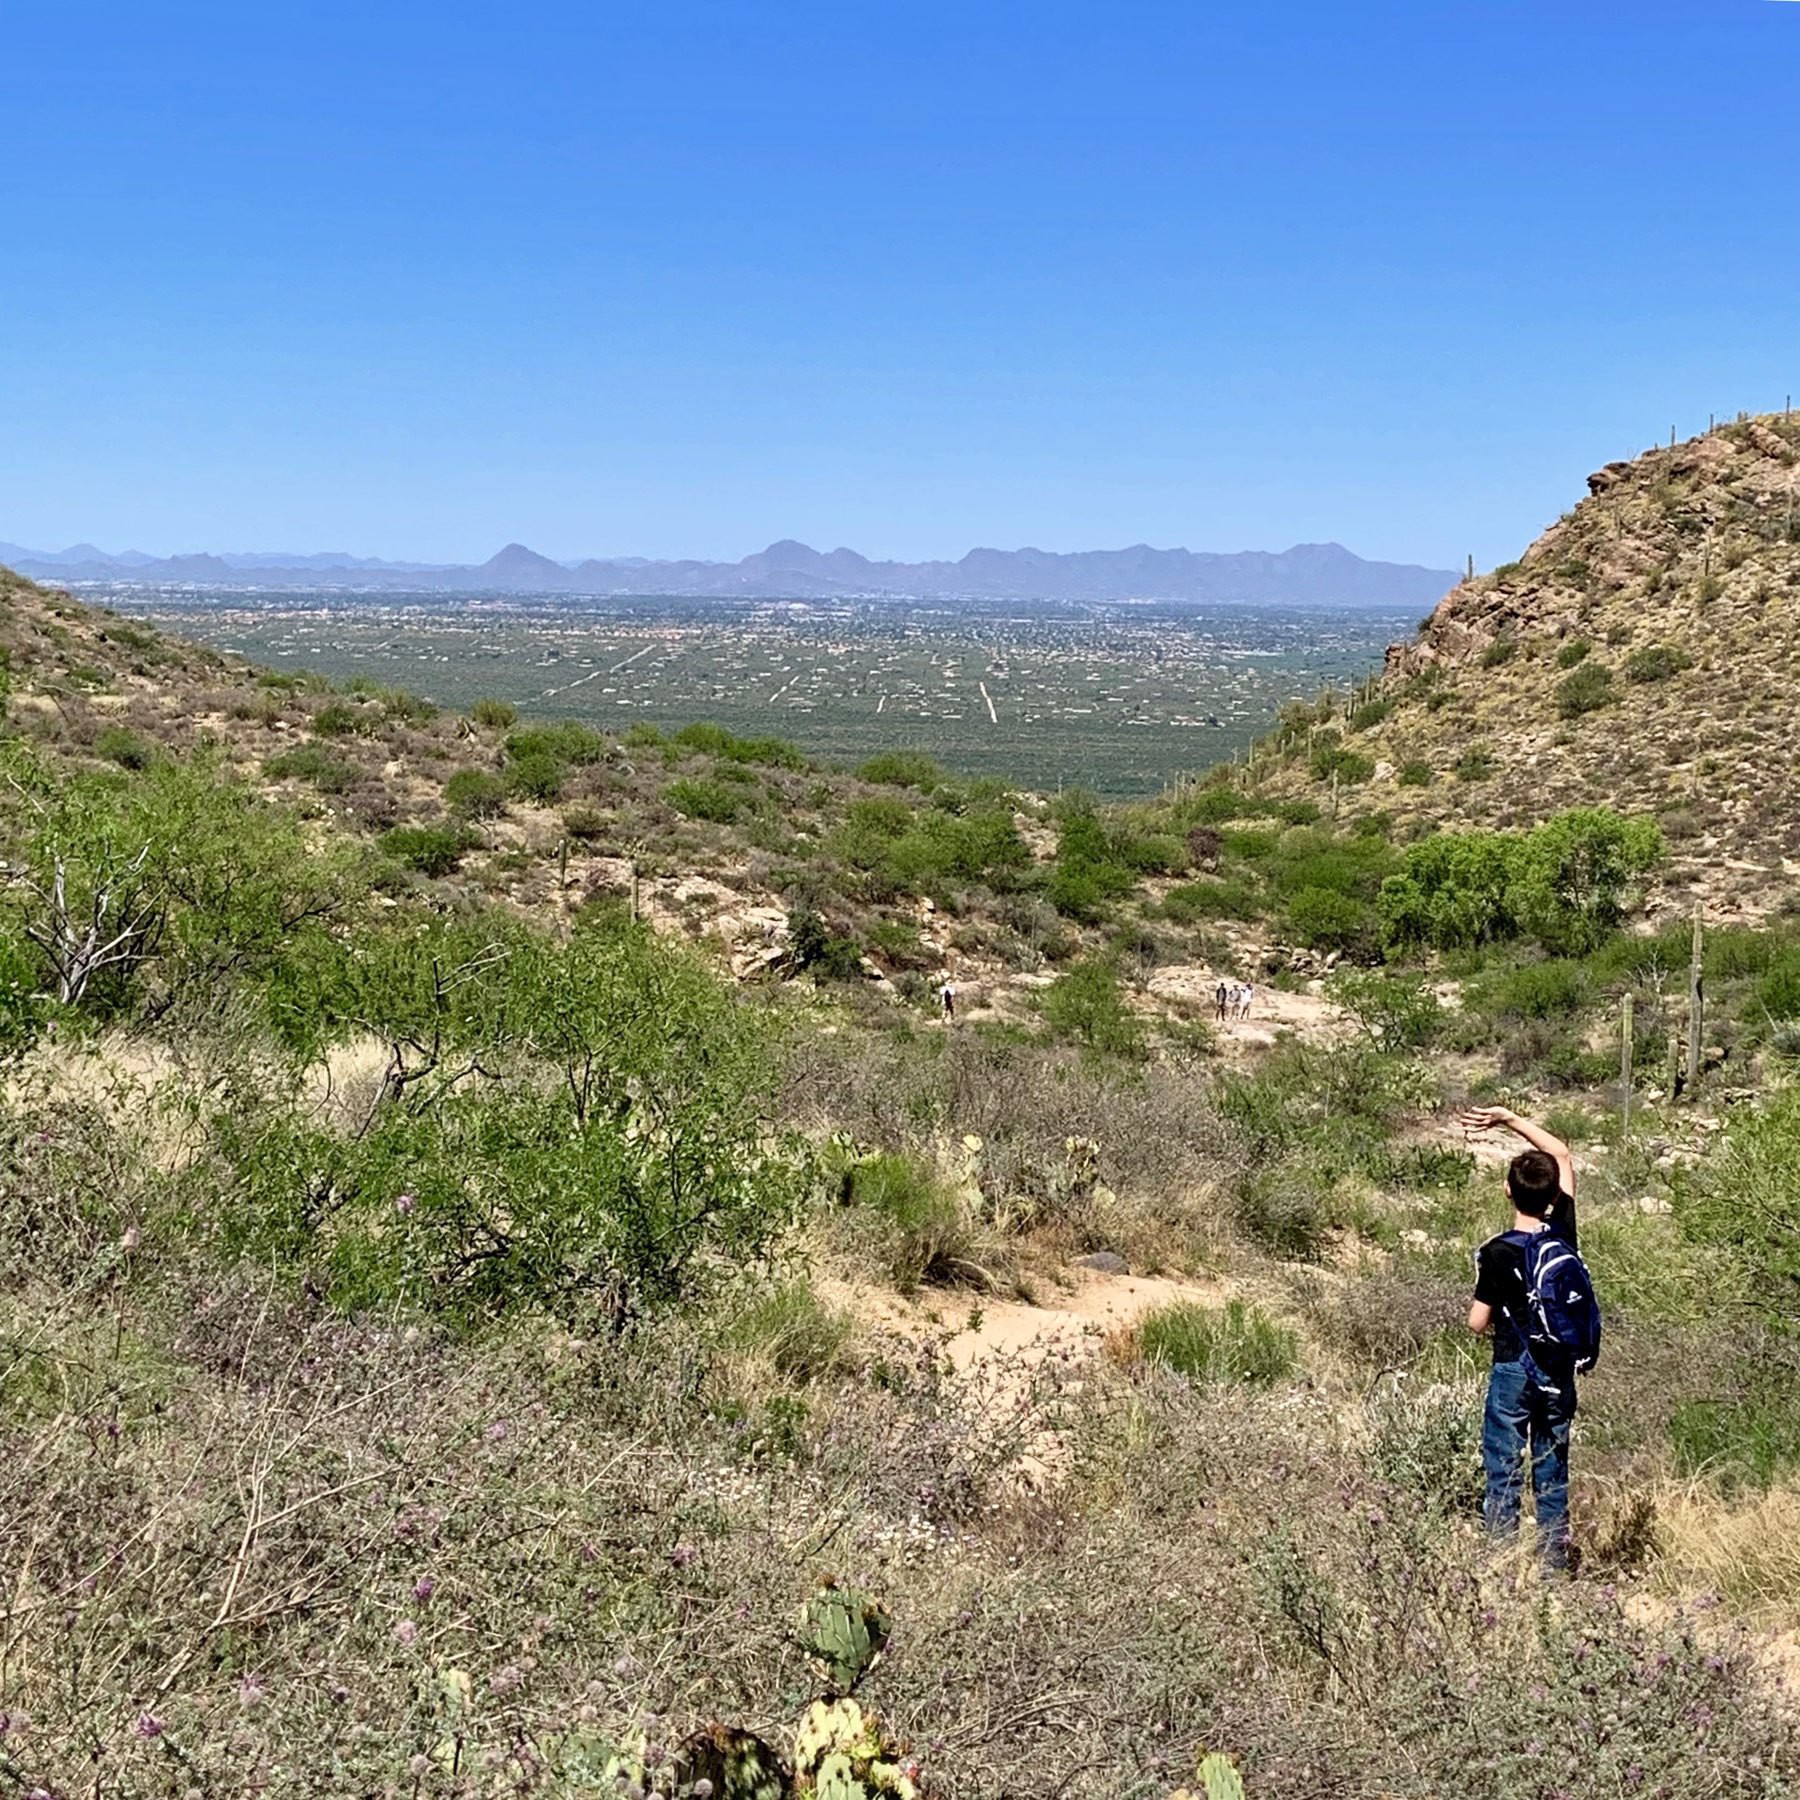 a view of Tucson looking from the mountains in the east